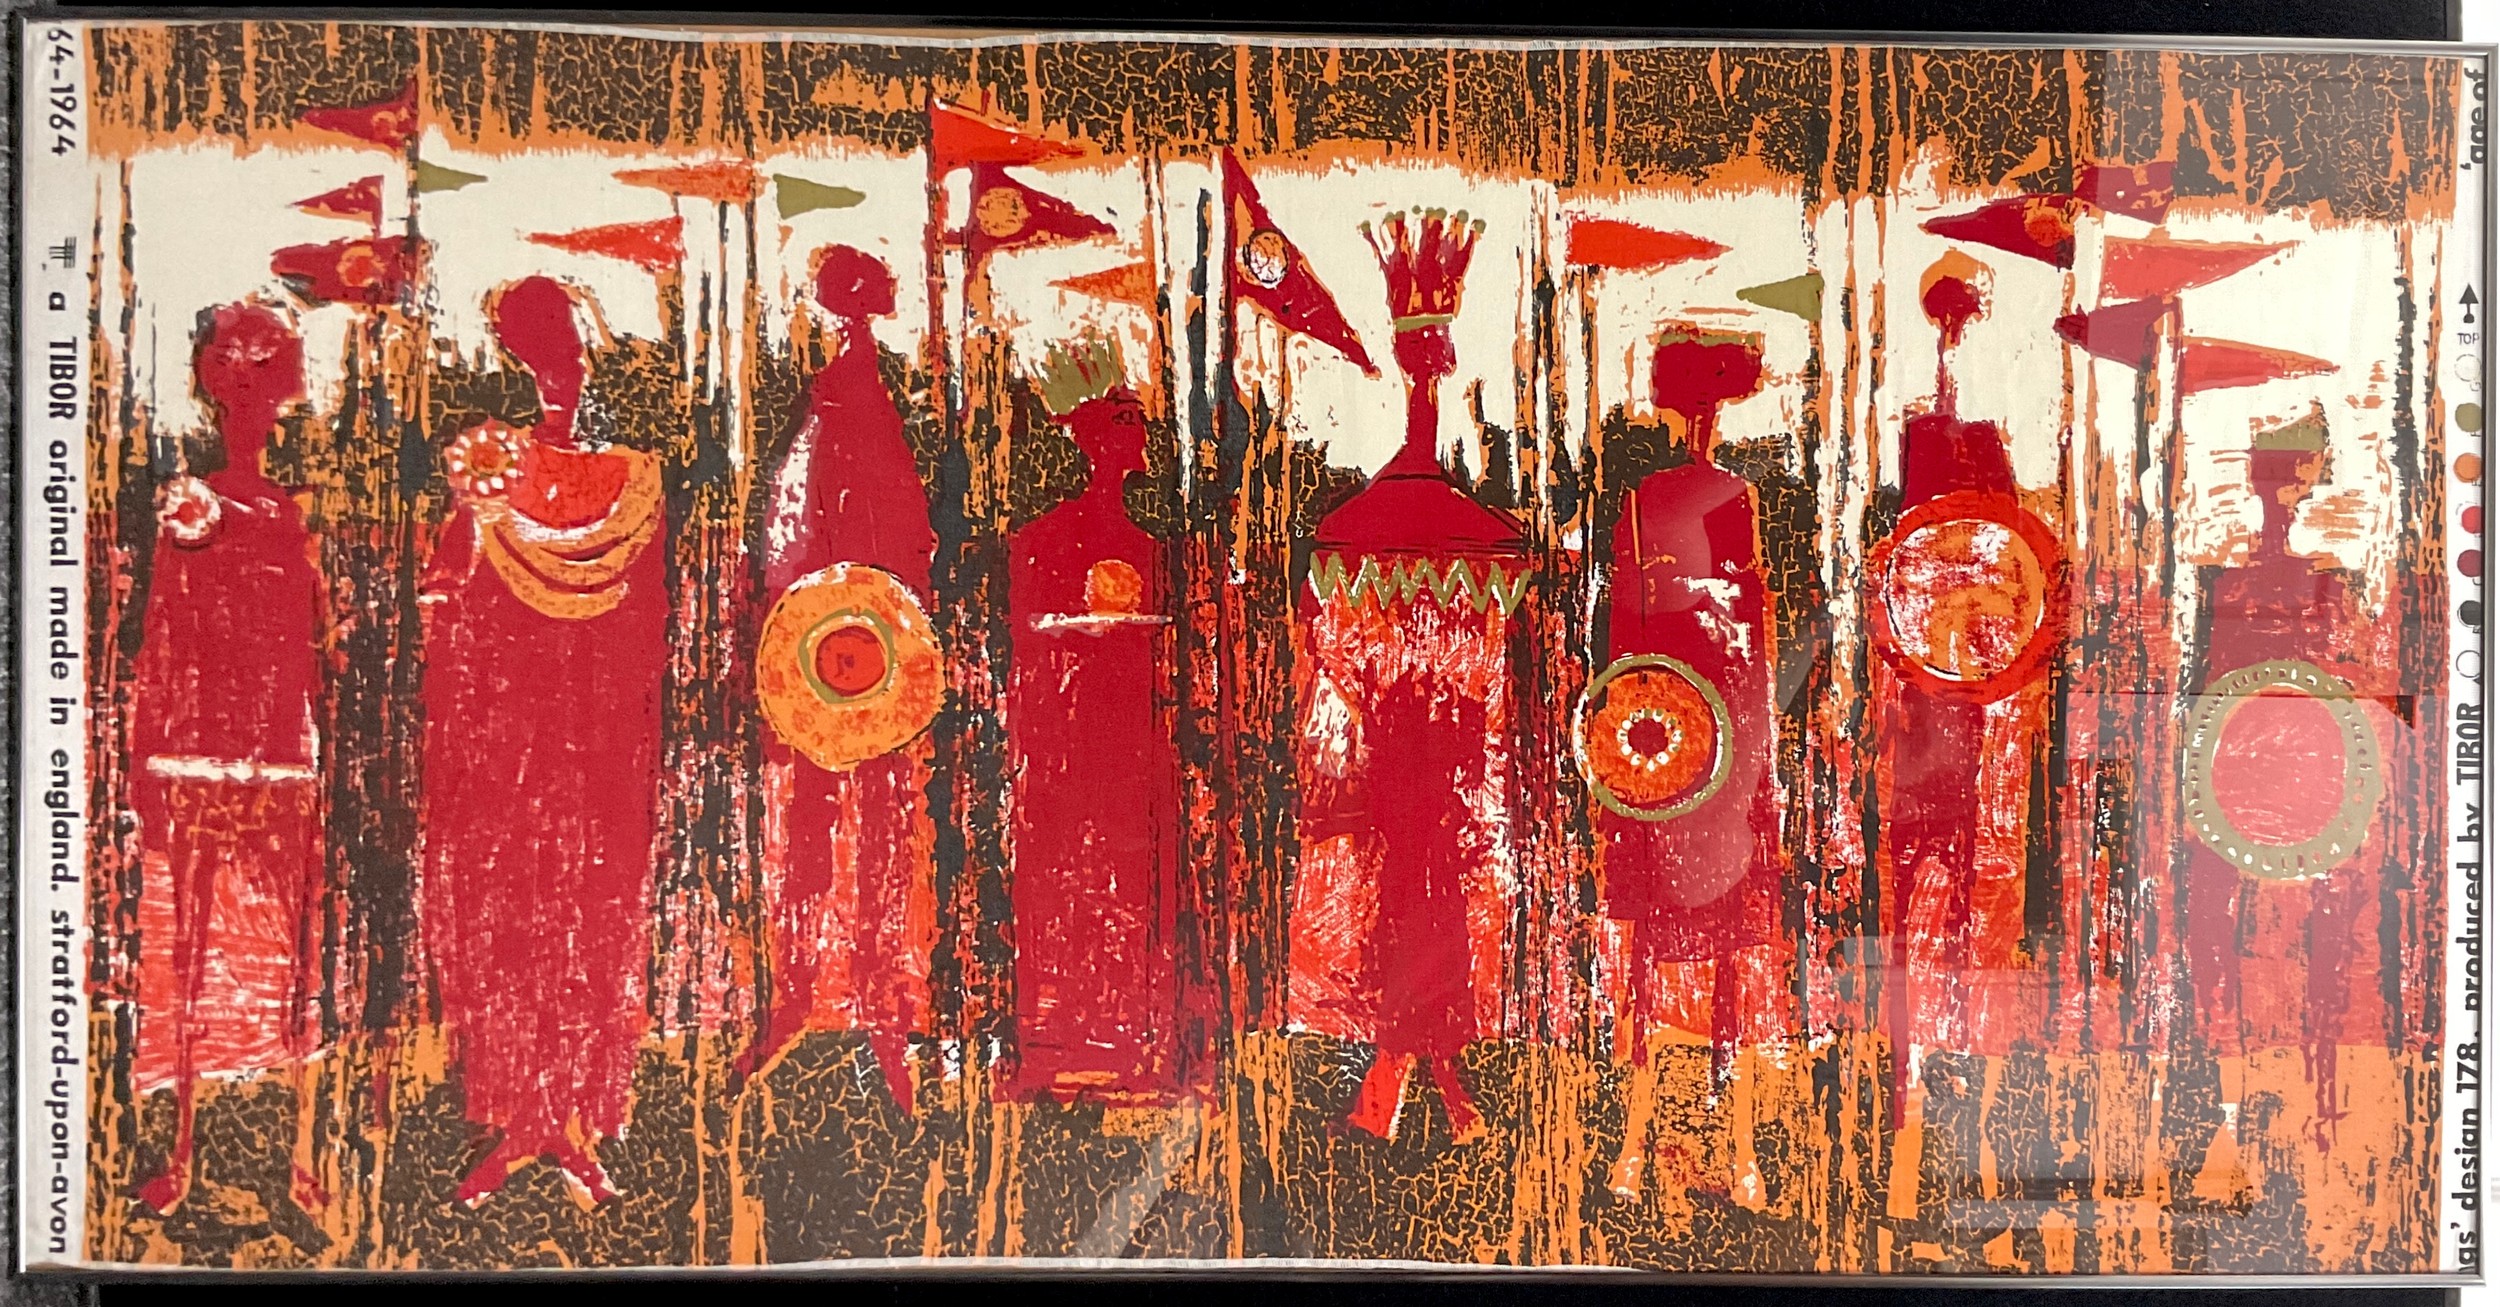 Tibor Reich (1916-1996), 'Age of Kings', designed in 1964, screen printed cotton textile, 63 x - Image 2 of 2